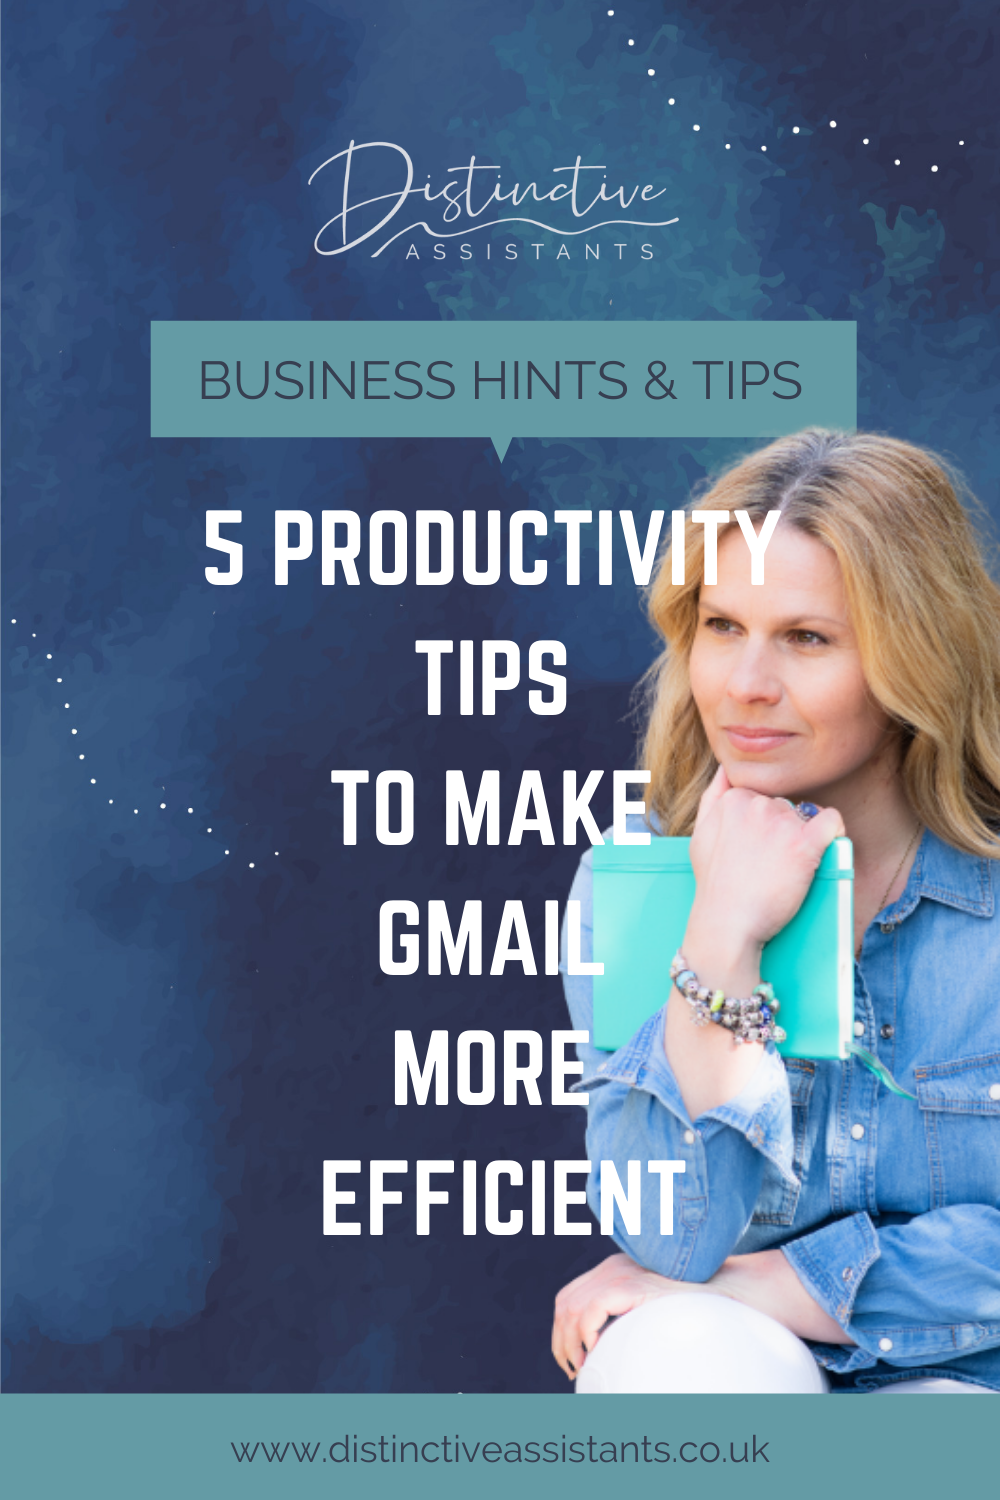 5 productivity tips to make gmail more efficient